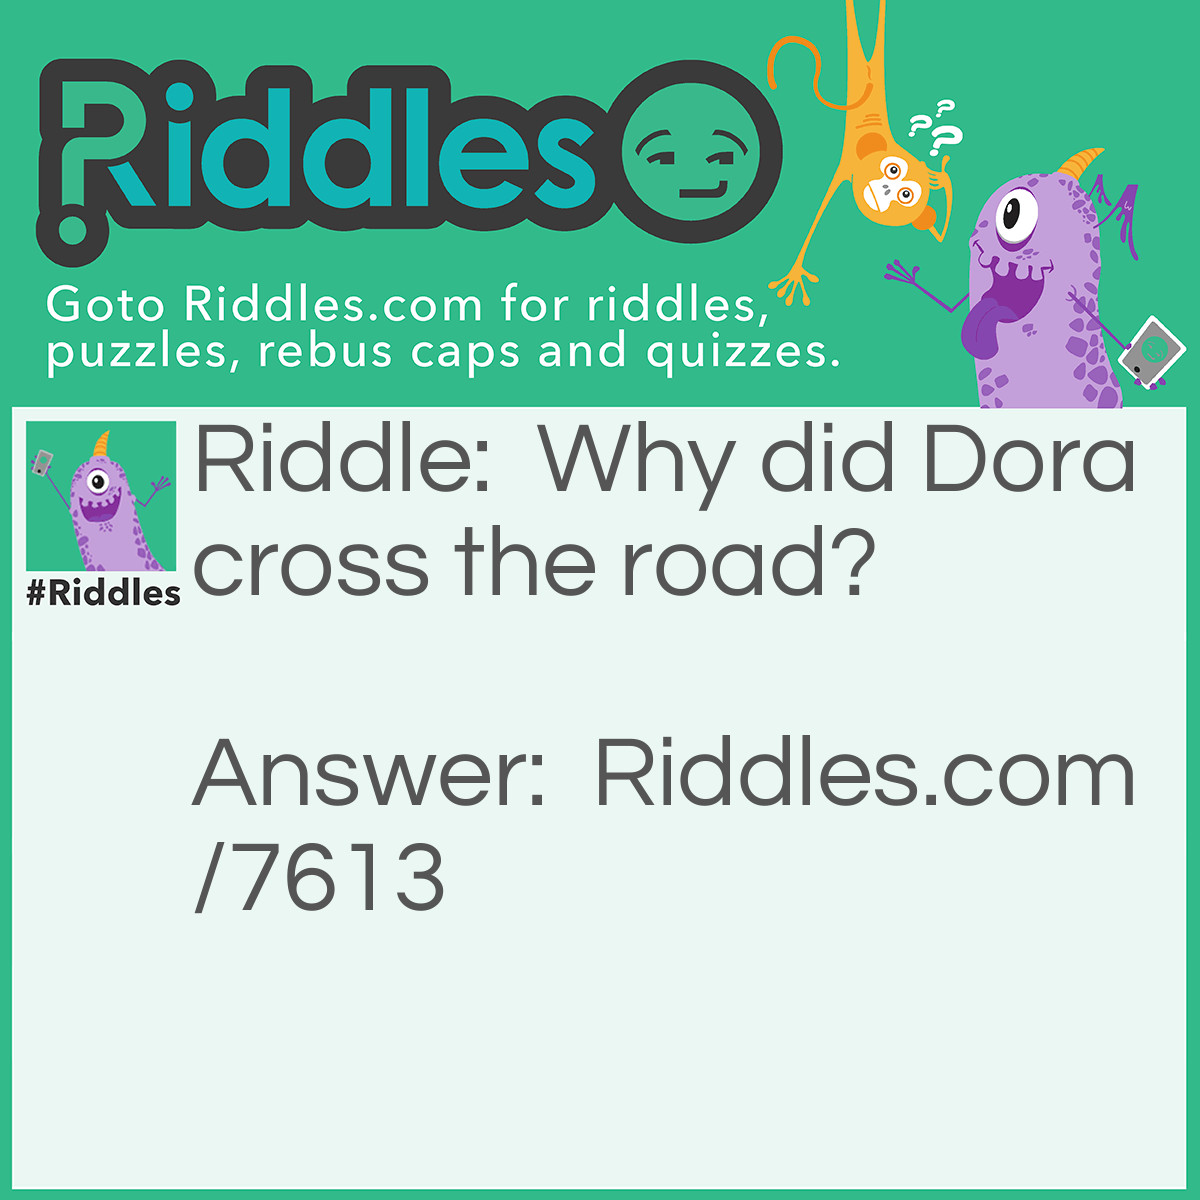 Riddle: Why did Dora cross the road? Answer: To explore the other side.